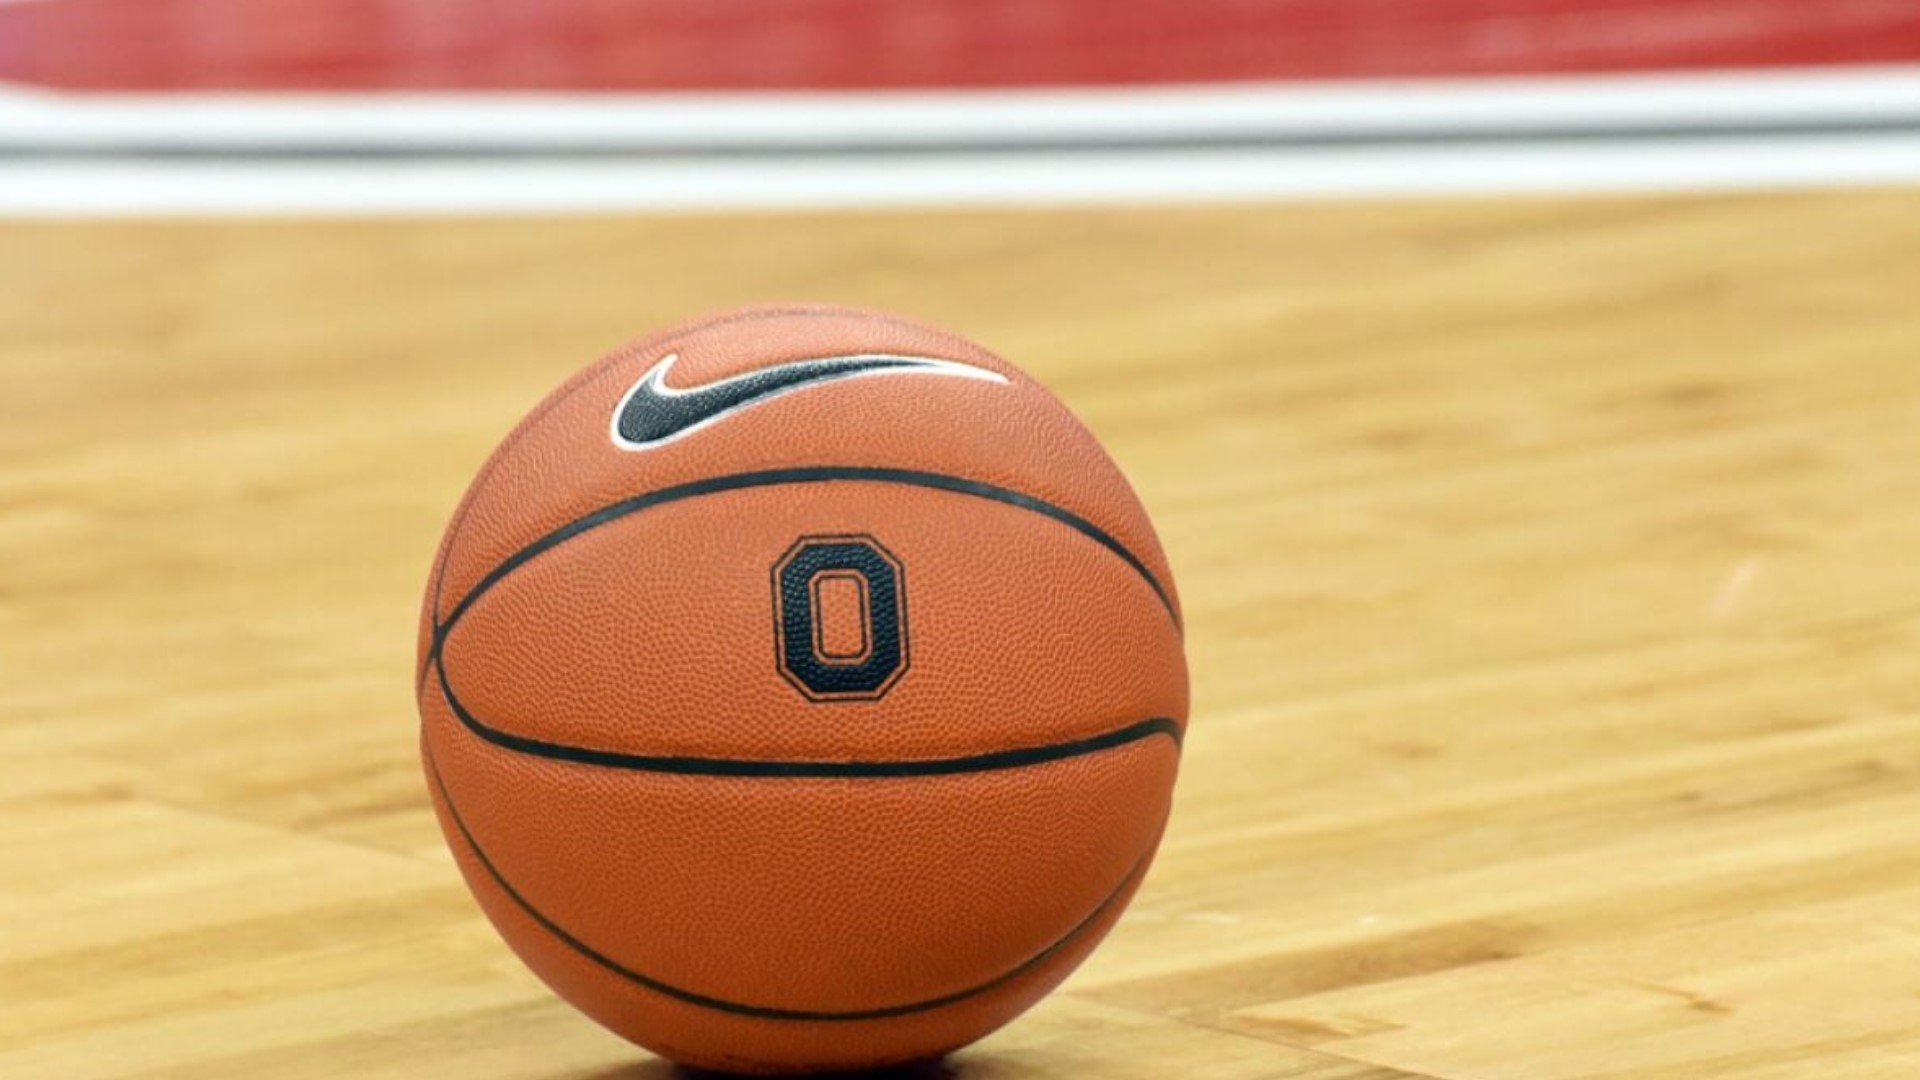 The violations occurred between 2015 and 2019 involving the fencing, women’s golf and women’s basketball programs.